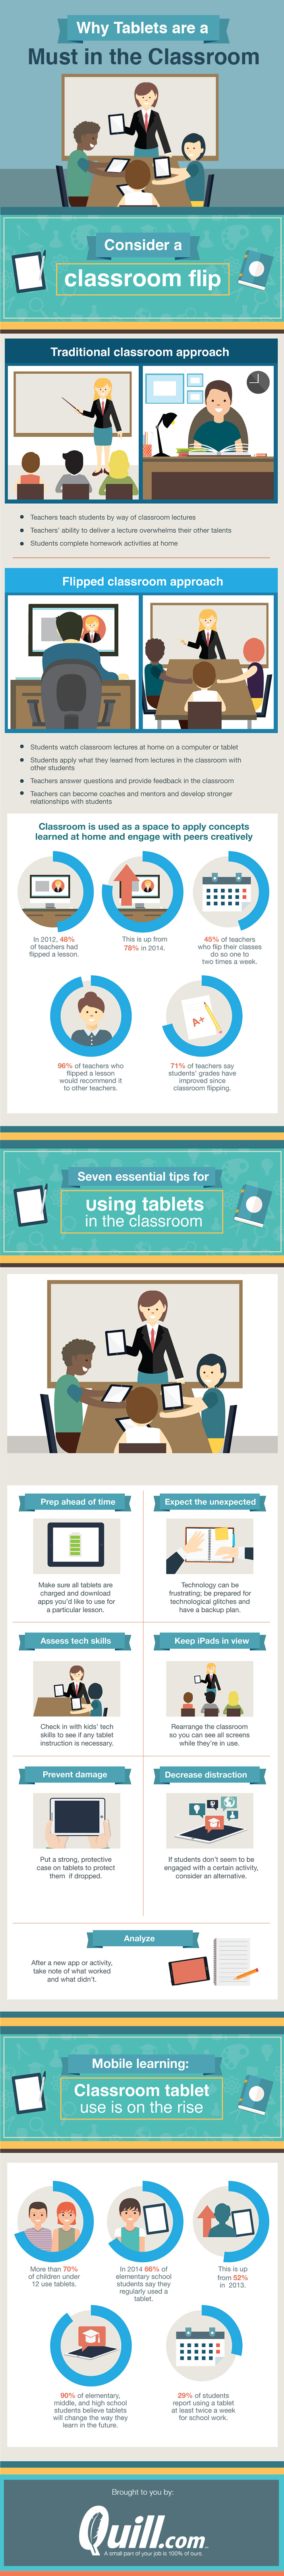 Tablets in the Classroom 